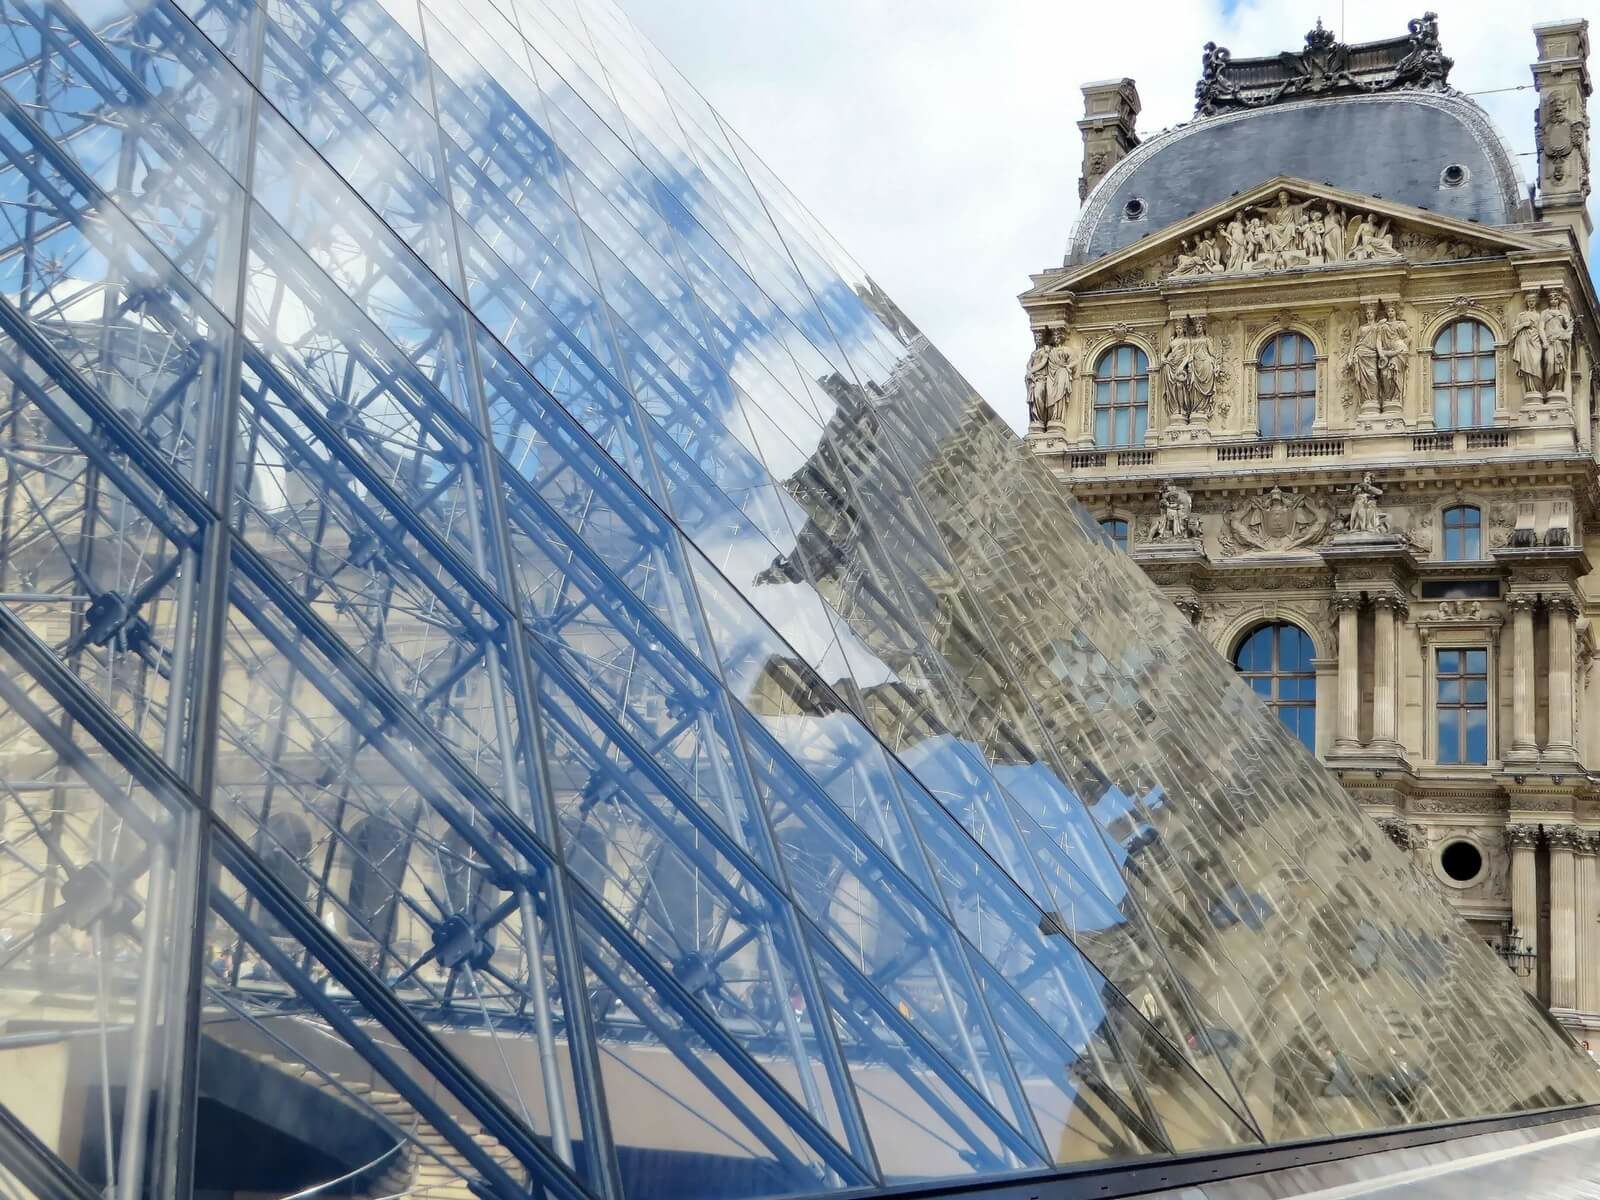 louvre pyramid with reflections of the stone building against the glass